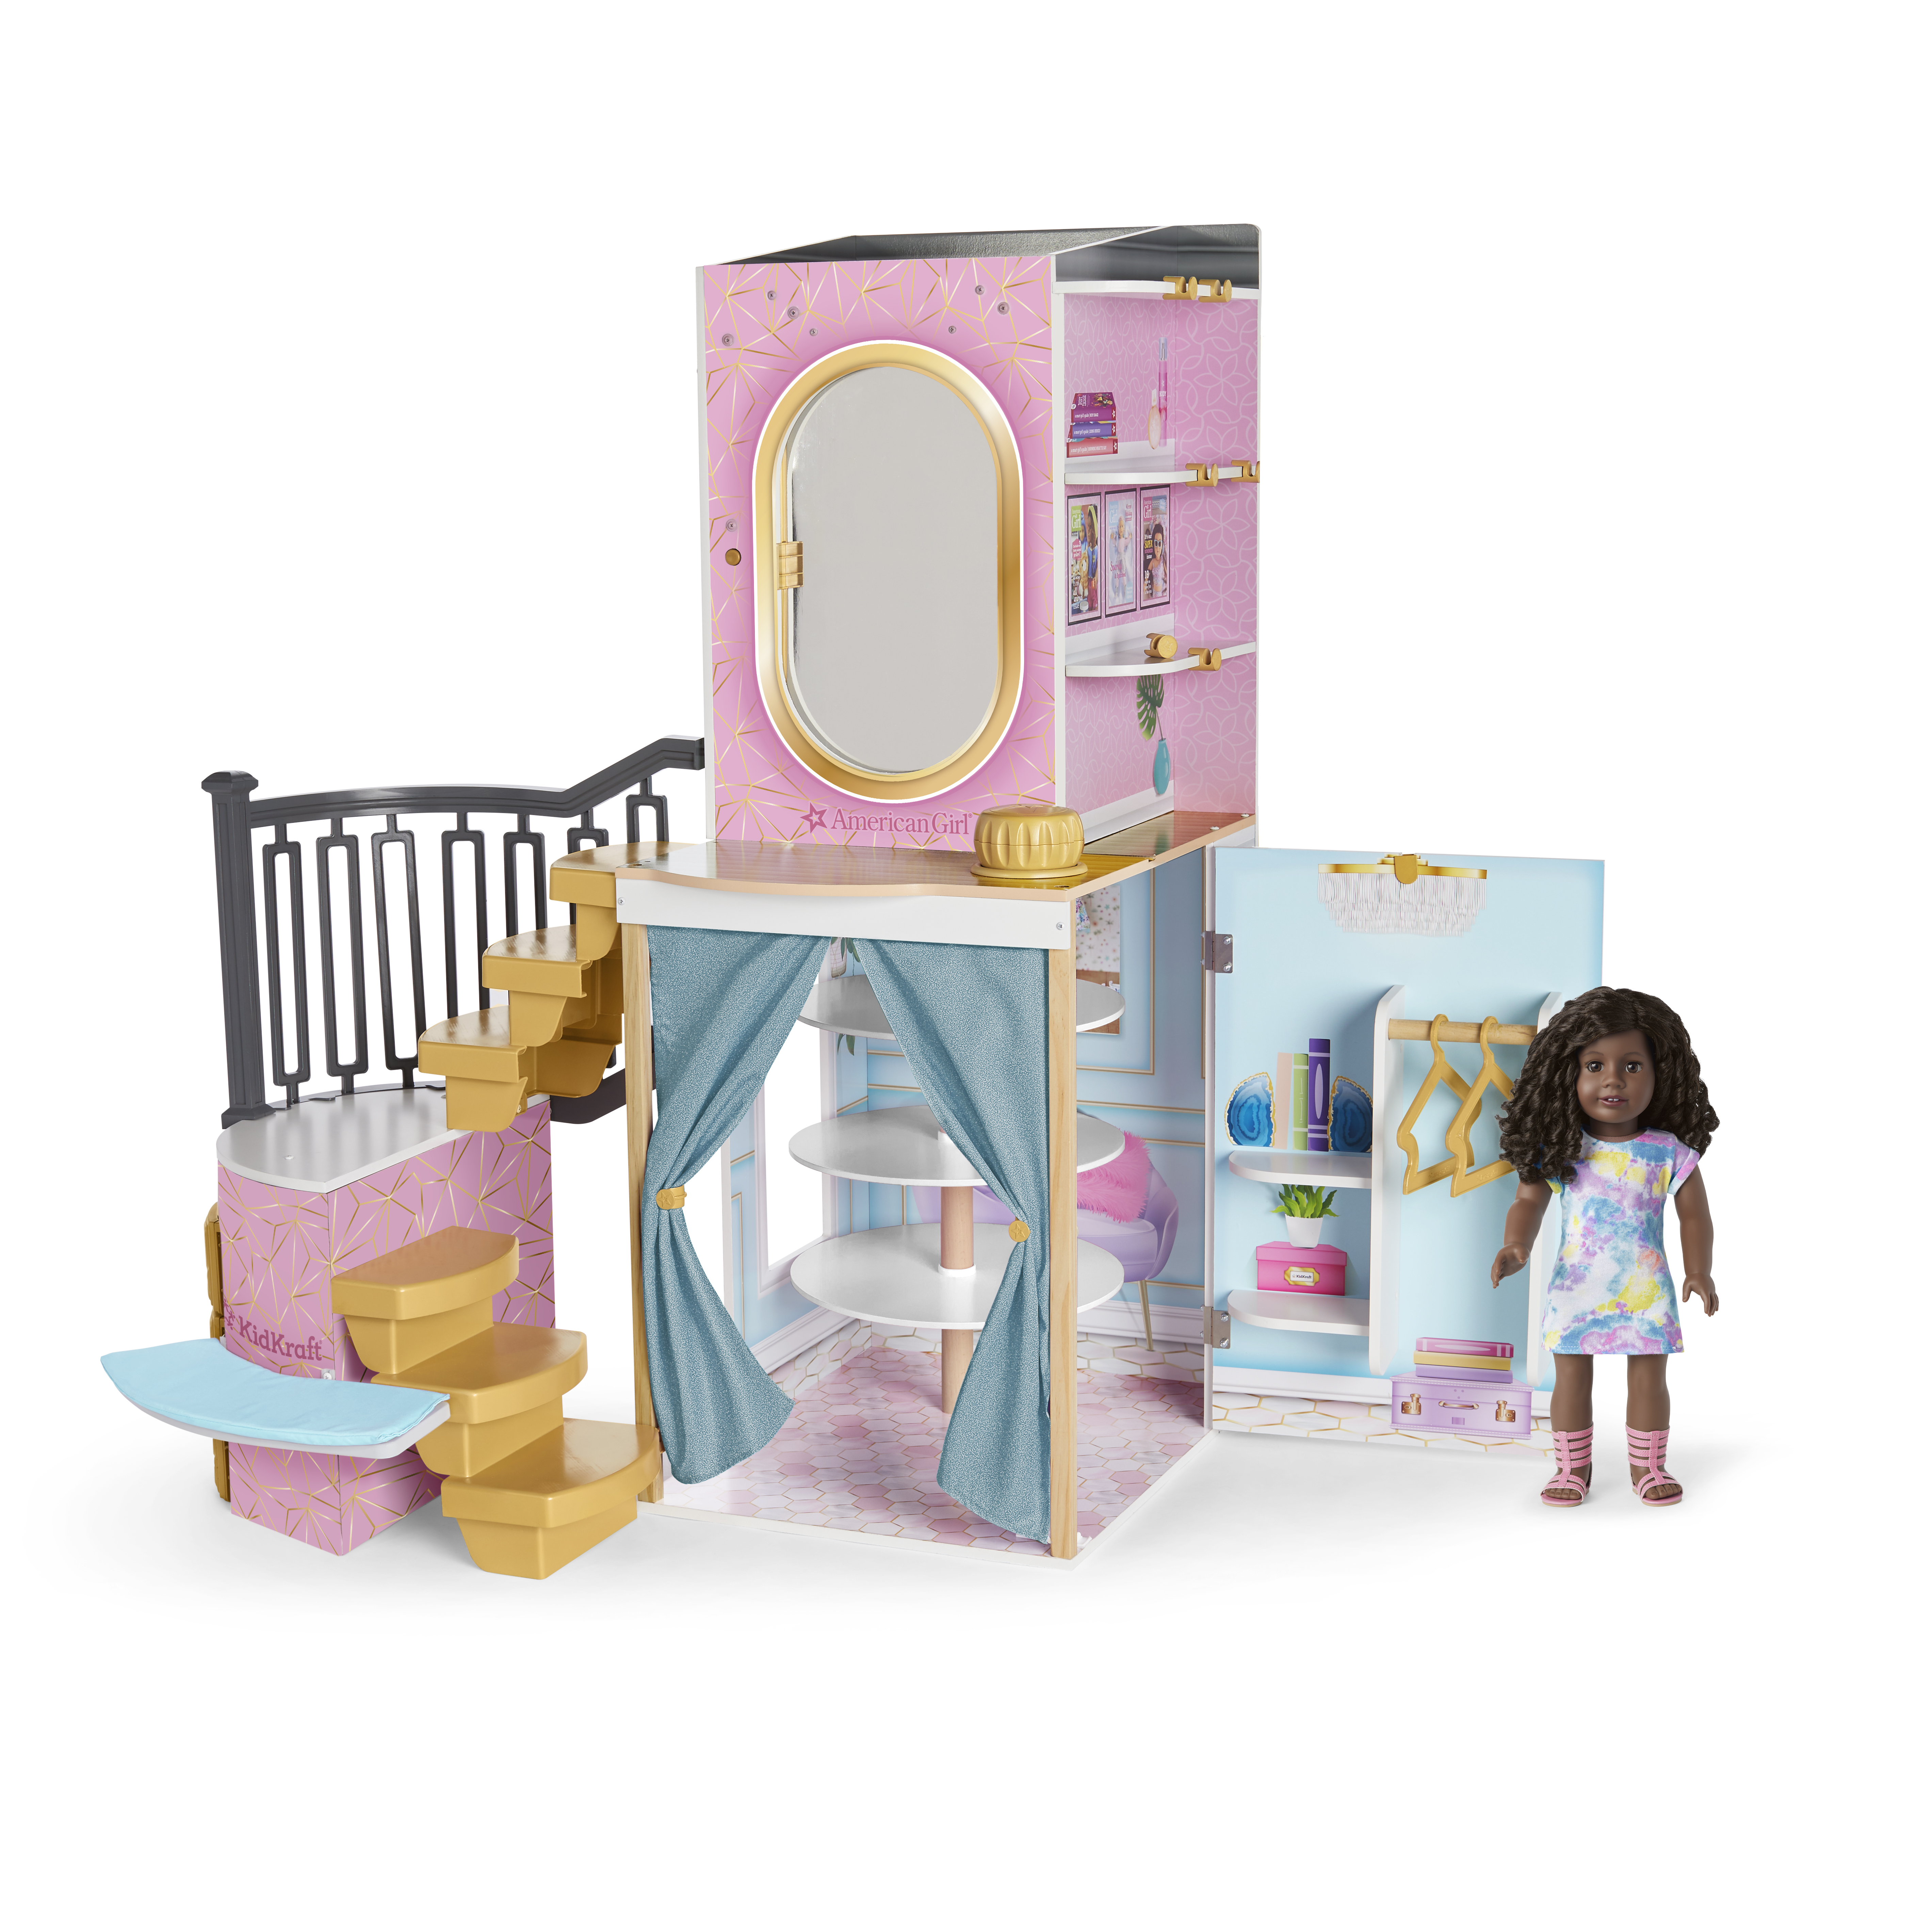 AMERICAN GIRL DOLL PETITE BOUTIQUE PLAY SET - BRAND NEW AGES 8+ – Work  House signs